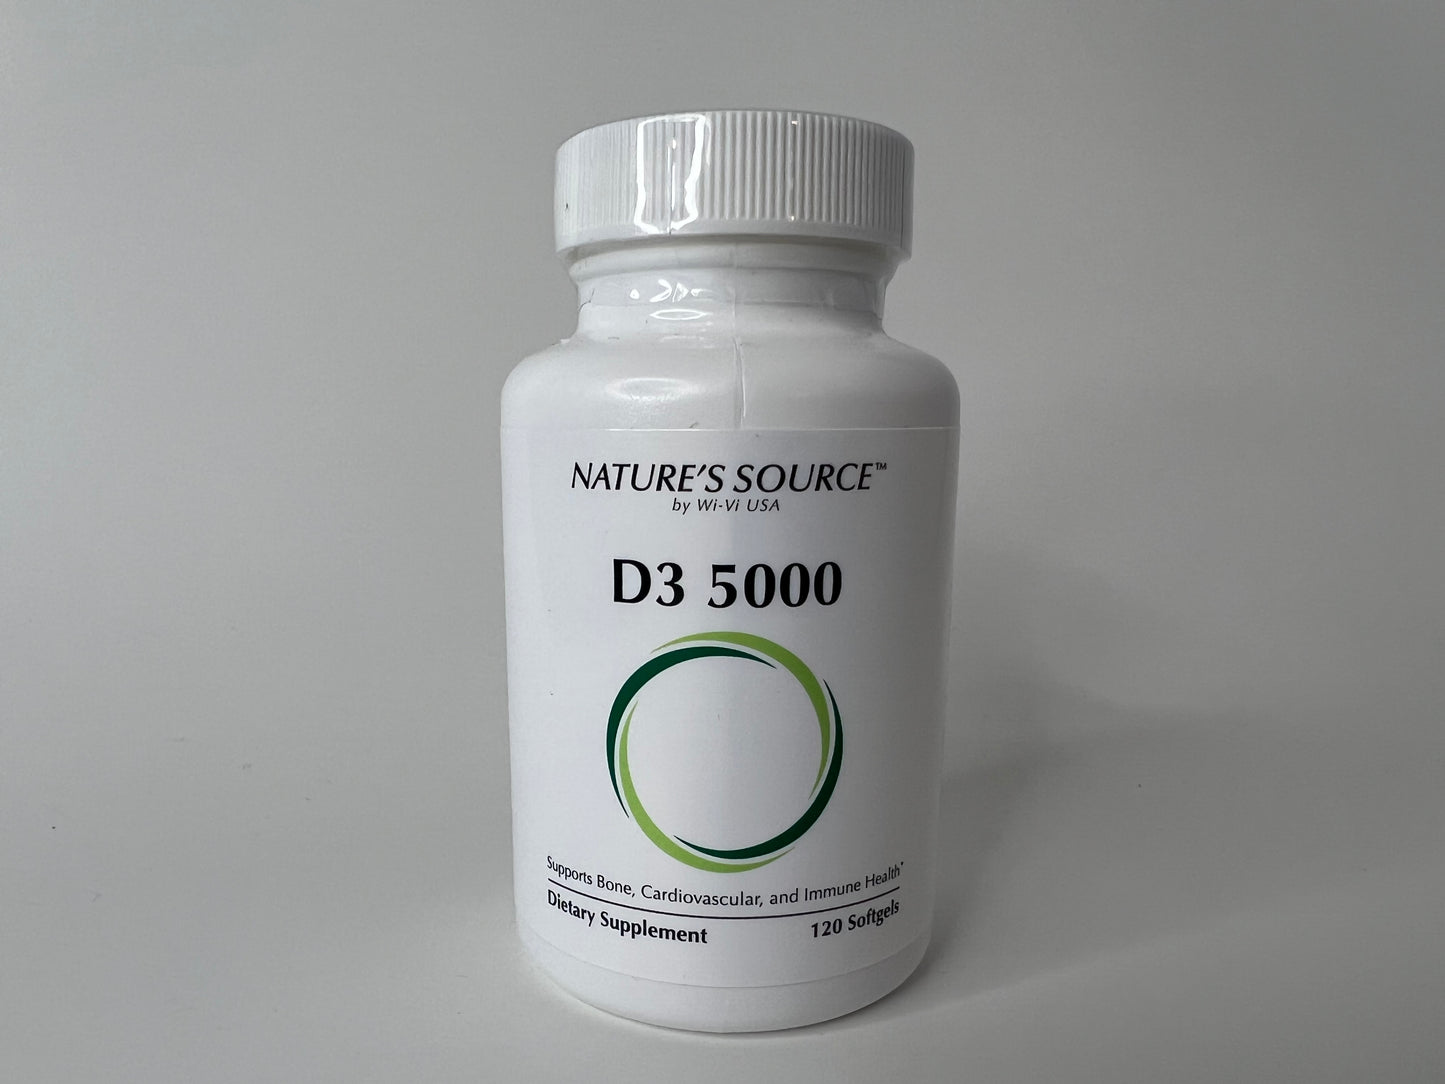 D3 5000 - Supports Bone, Cardiovascular and Immune Health by: Nature's Source